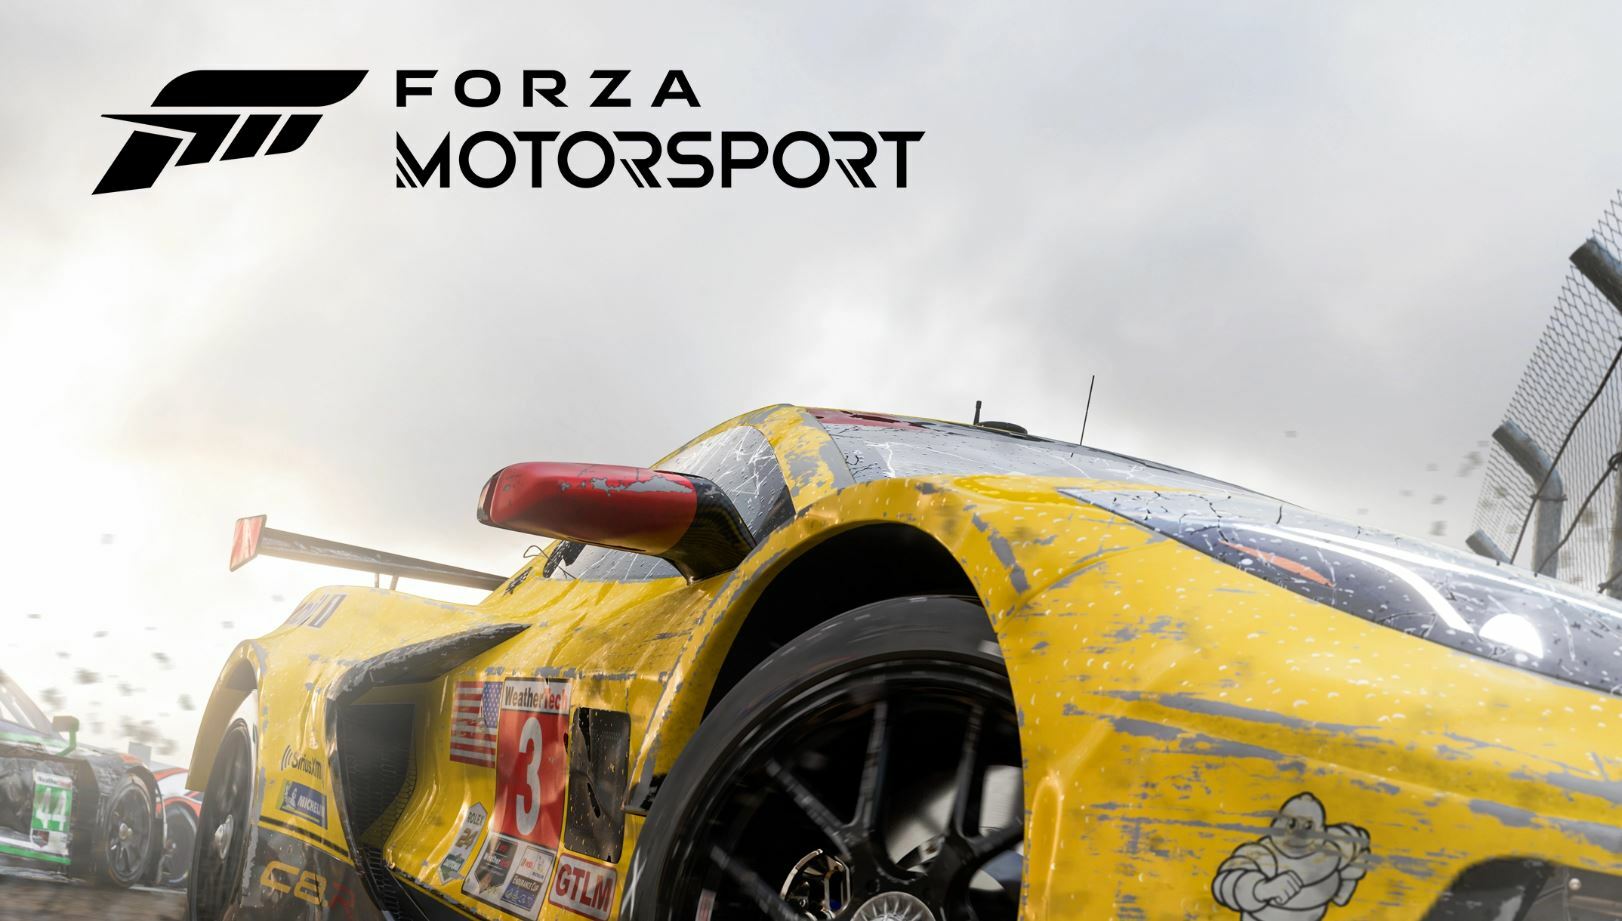 Darrius Fears on X: Forza Motorsport 8 Reviews so far Player 2